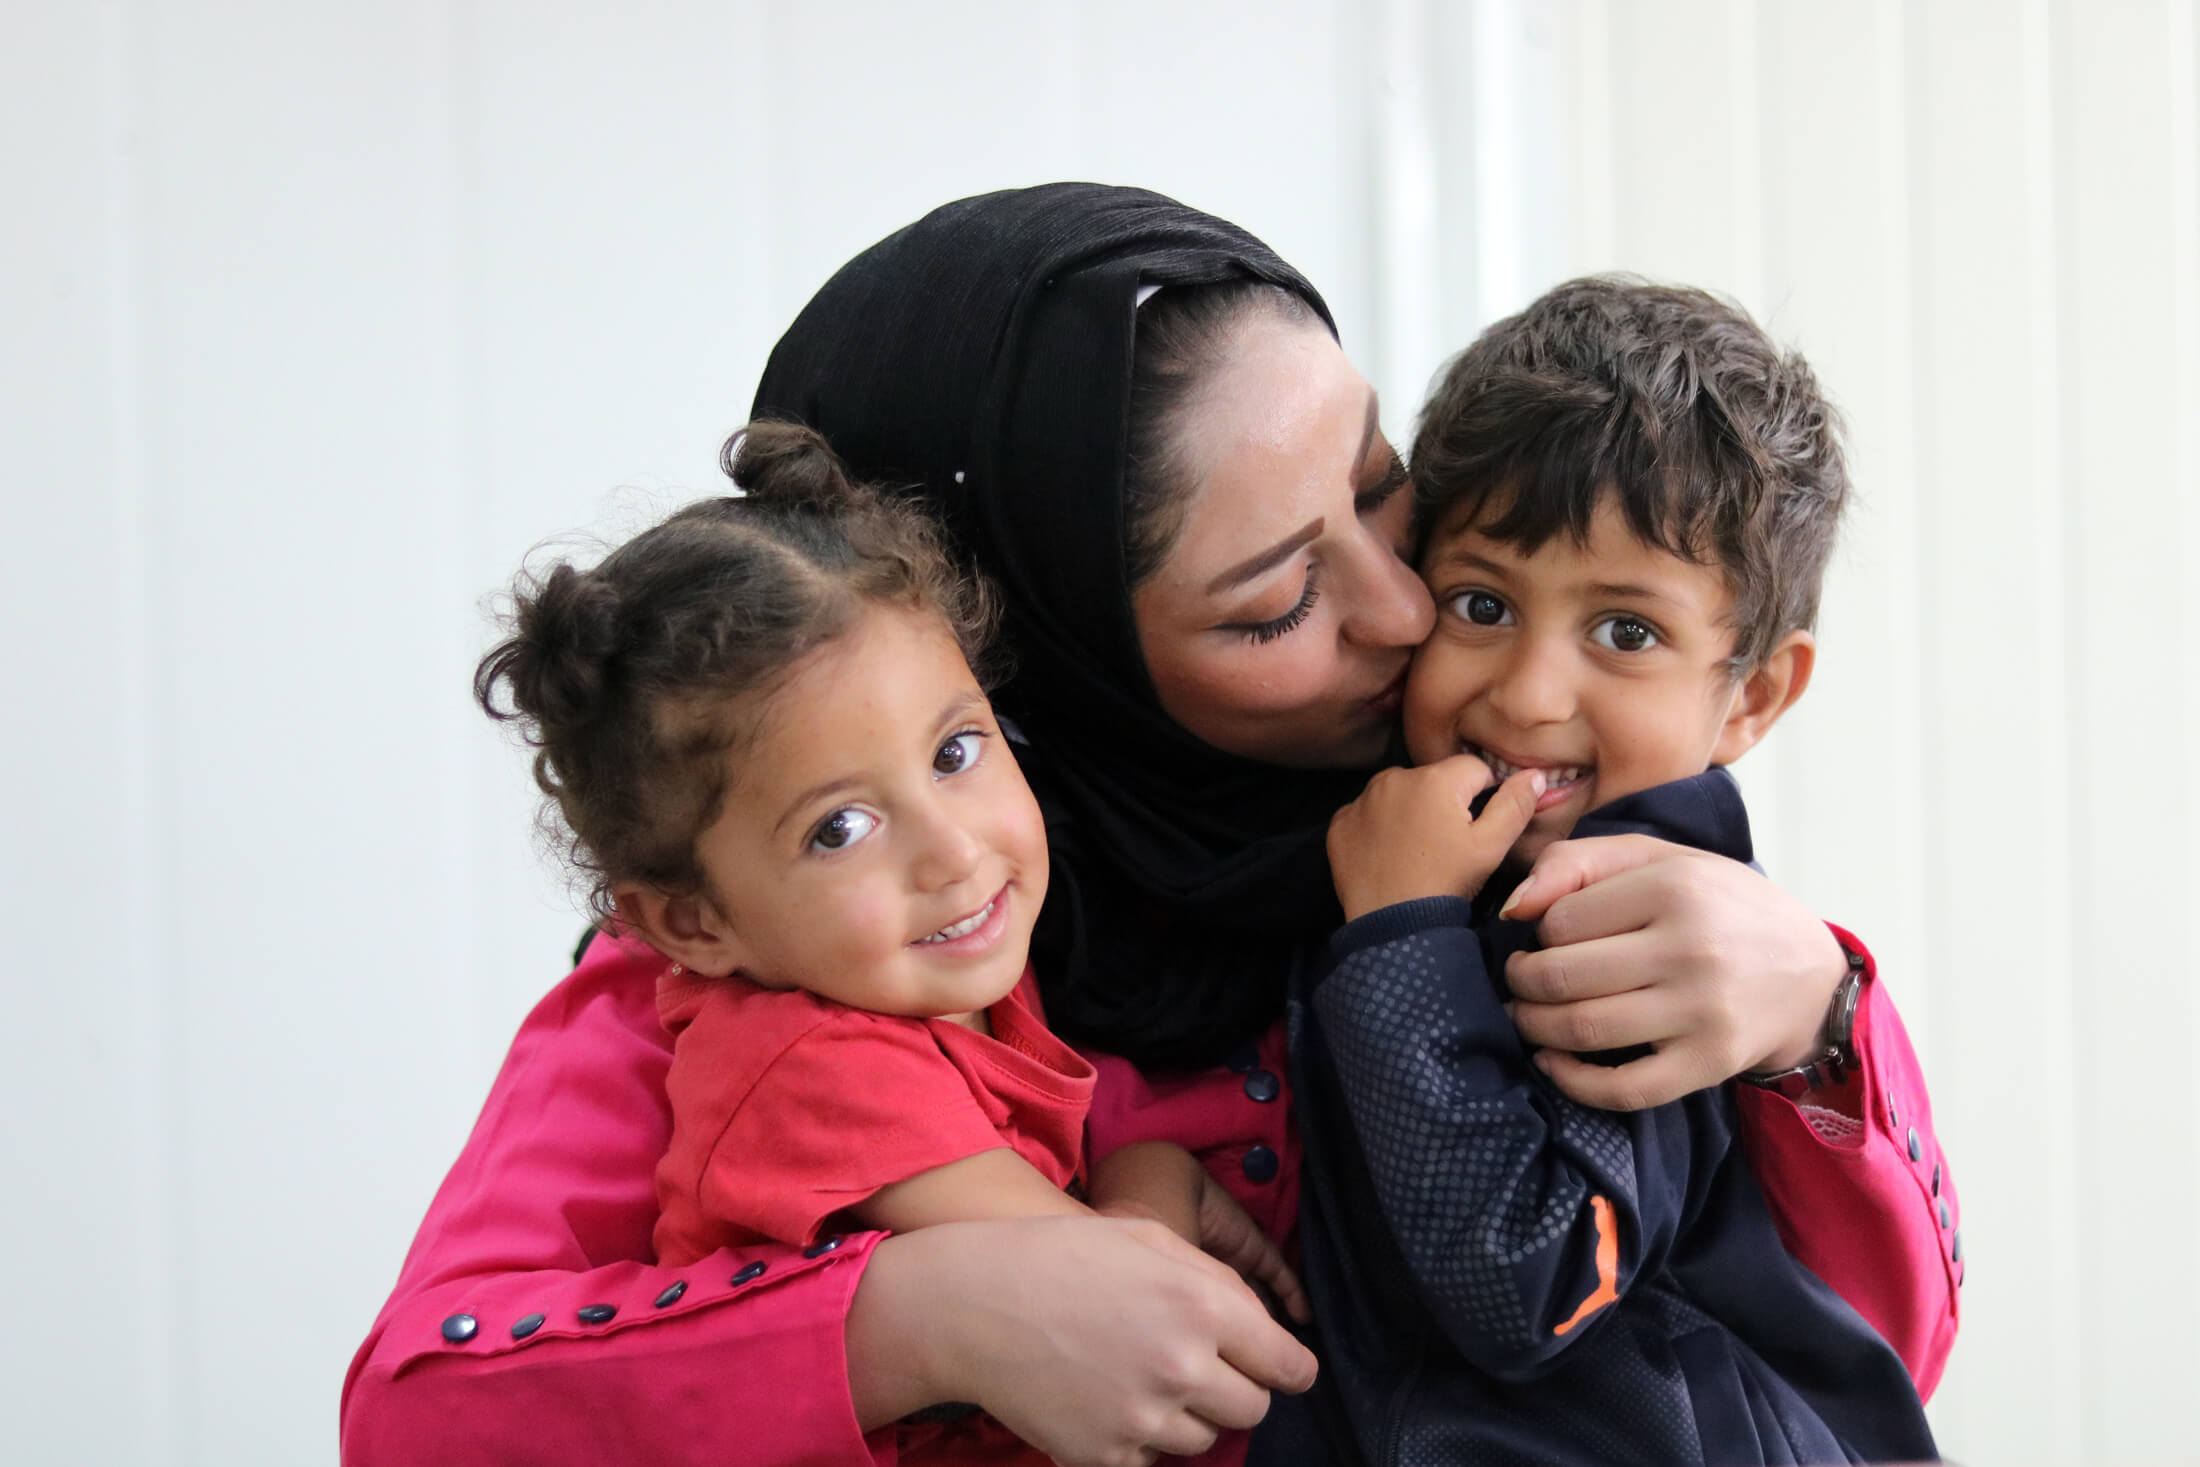 Alia, a Syrian refugee with her children.